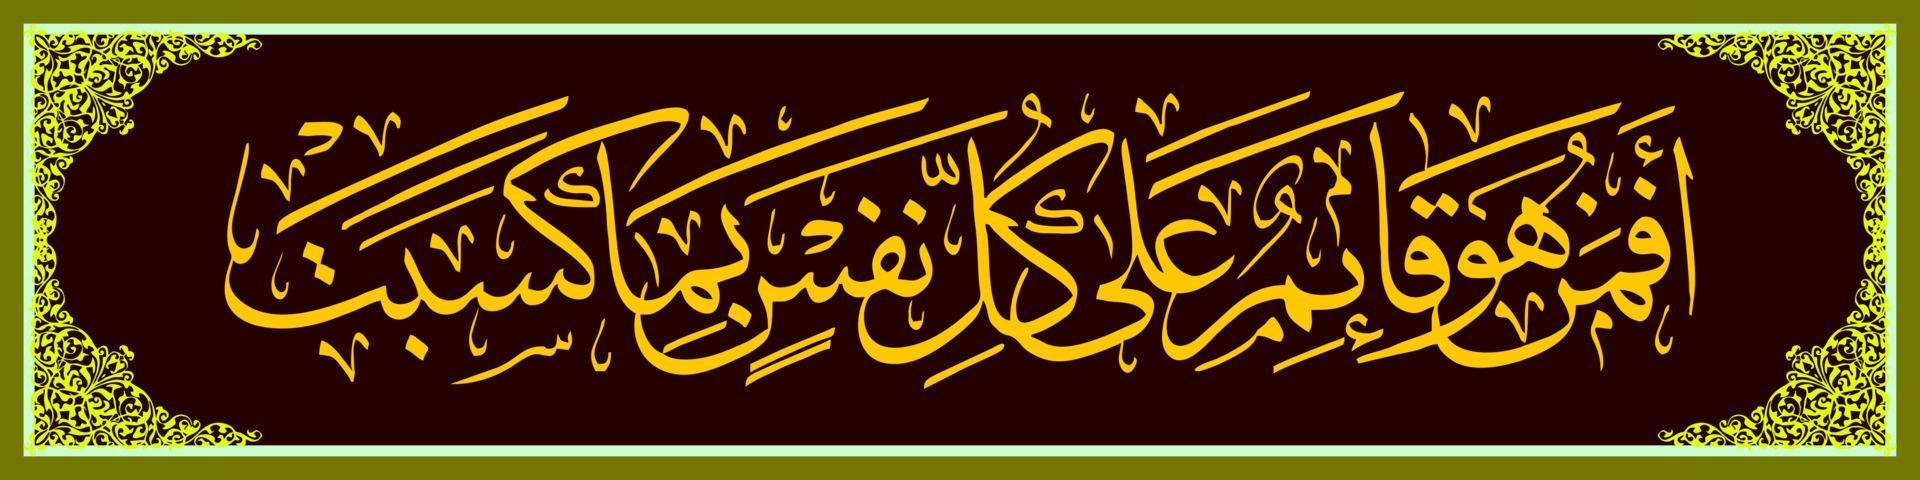 Arabic Calligraphy , Al Qur'an Surah ar ra'd 33, Translate Then is it God who guards every soul against what it does the same as the others They make partners partners for Allah. . vector